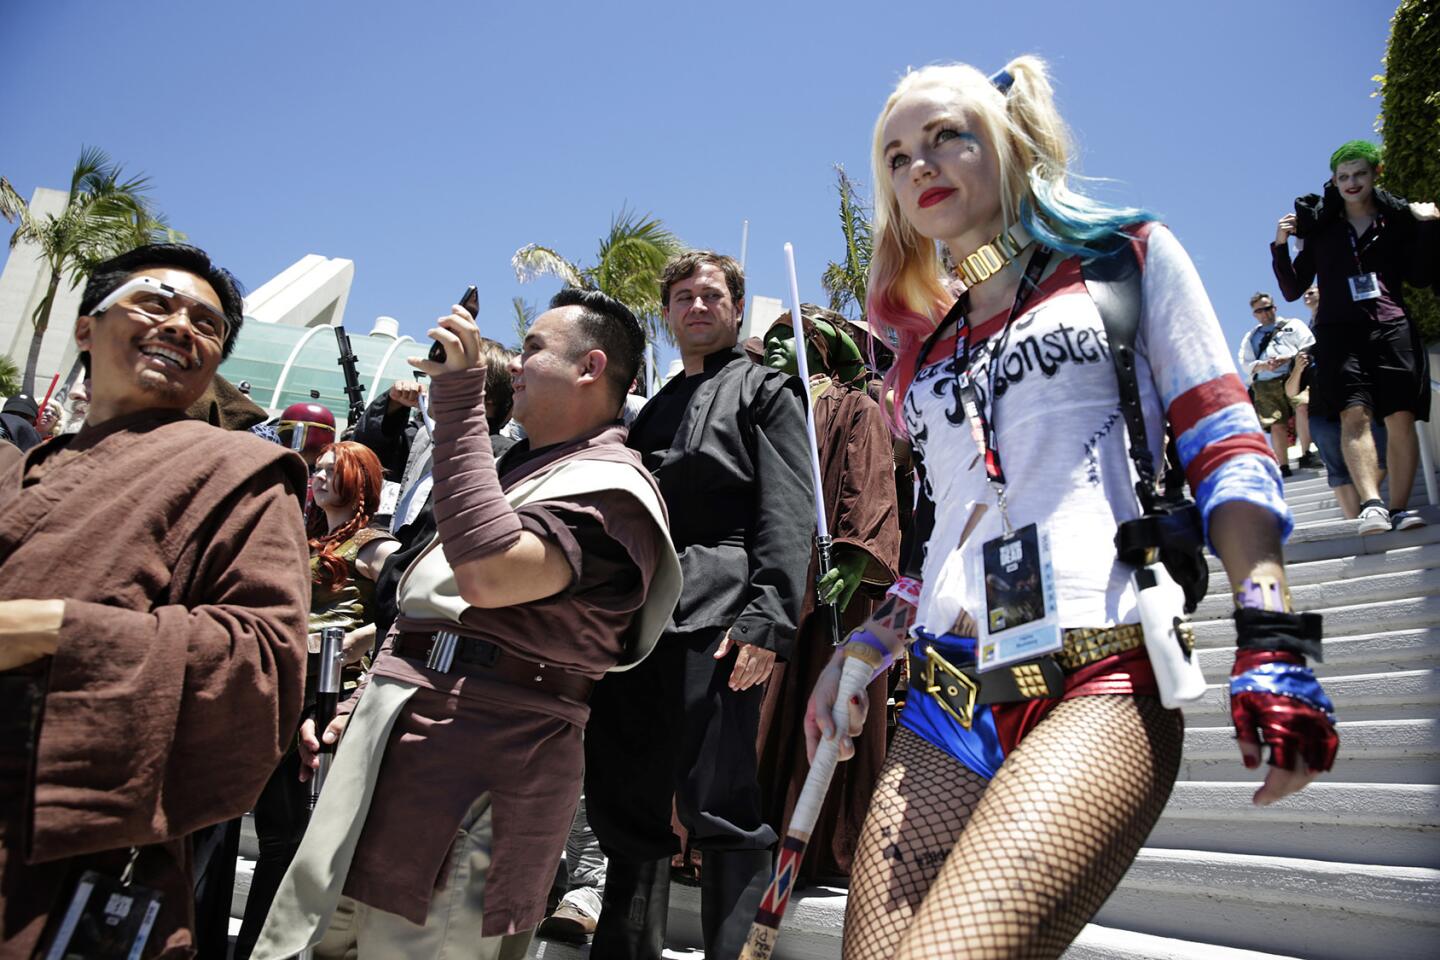 Quinn cosplay: Hayley Blumberg as Harley Quinn during day two of Comic-Con 2016.